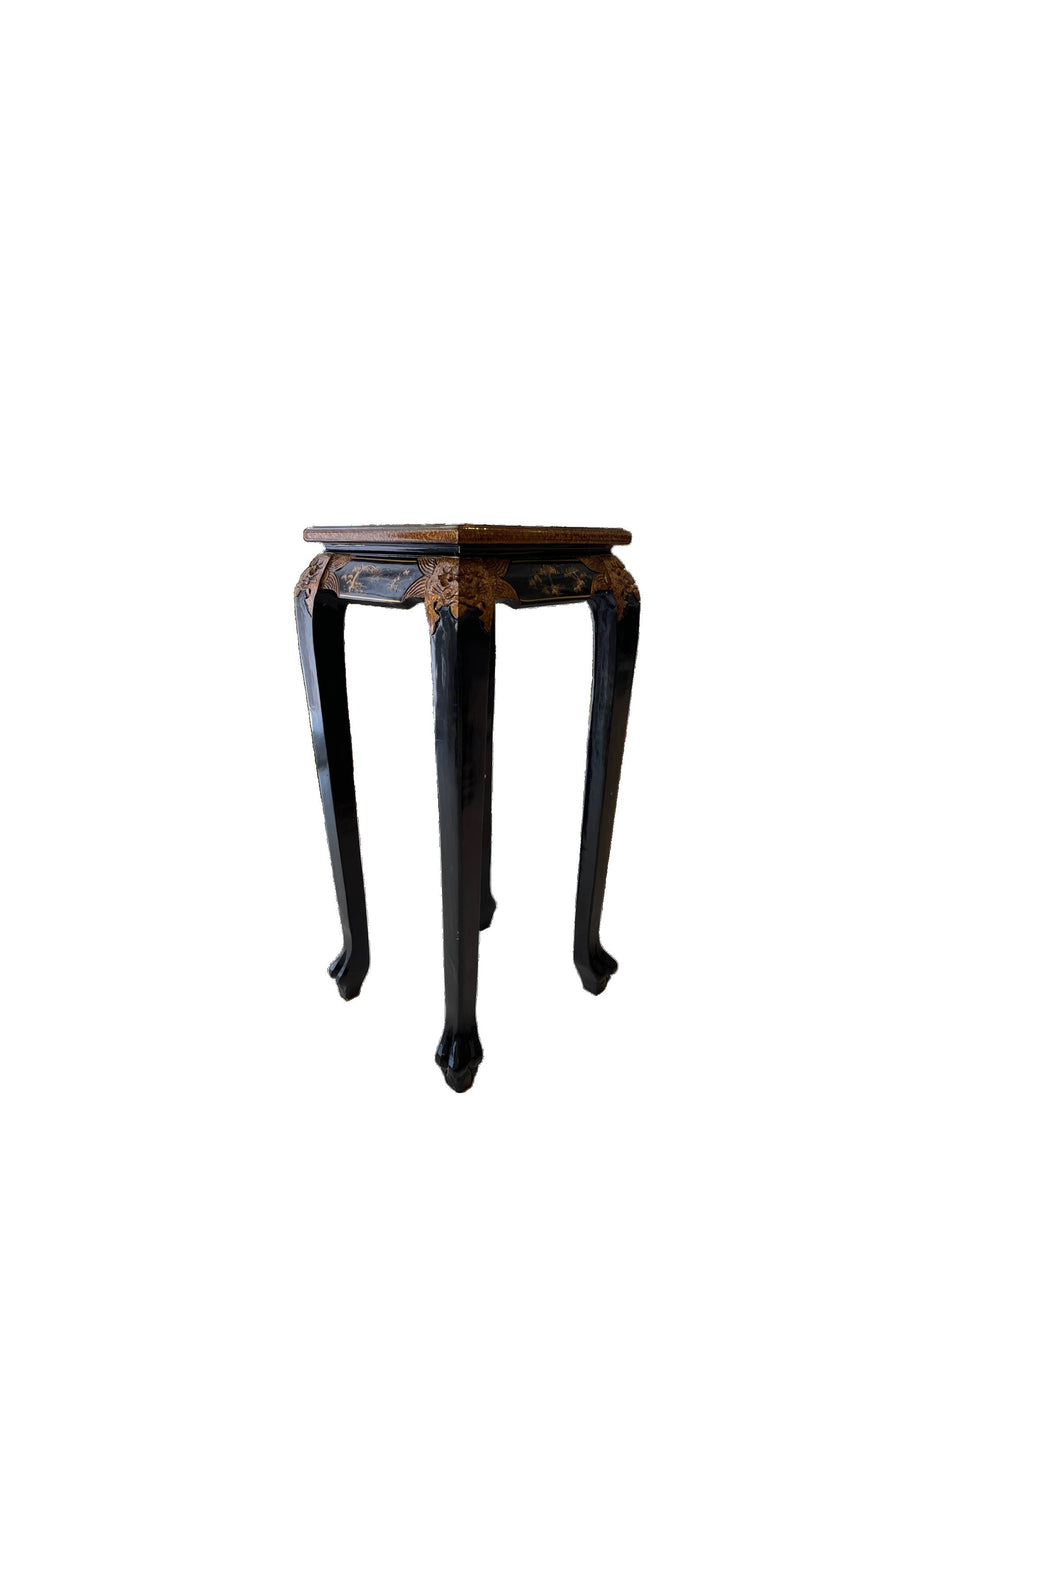 Chinoiserie Black Lacqured Plant Stand with Gold Trim